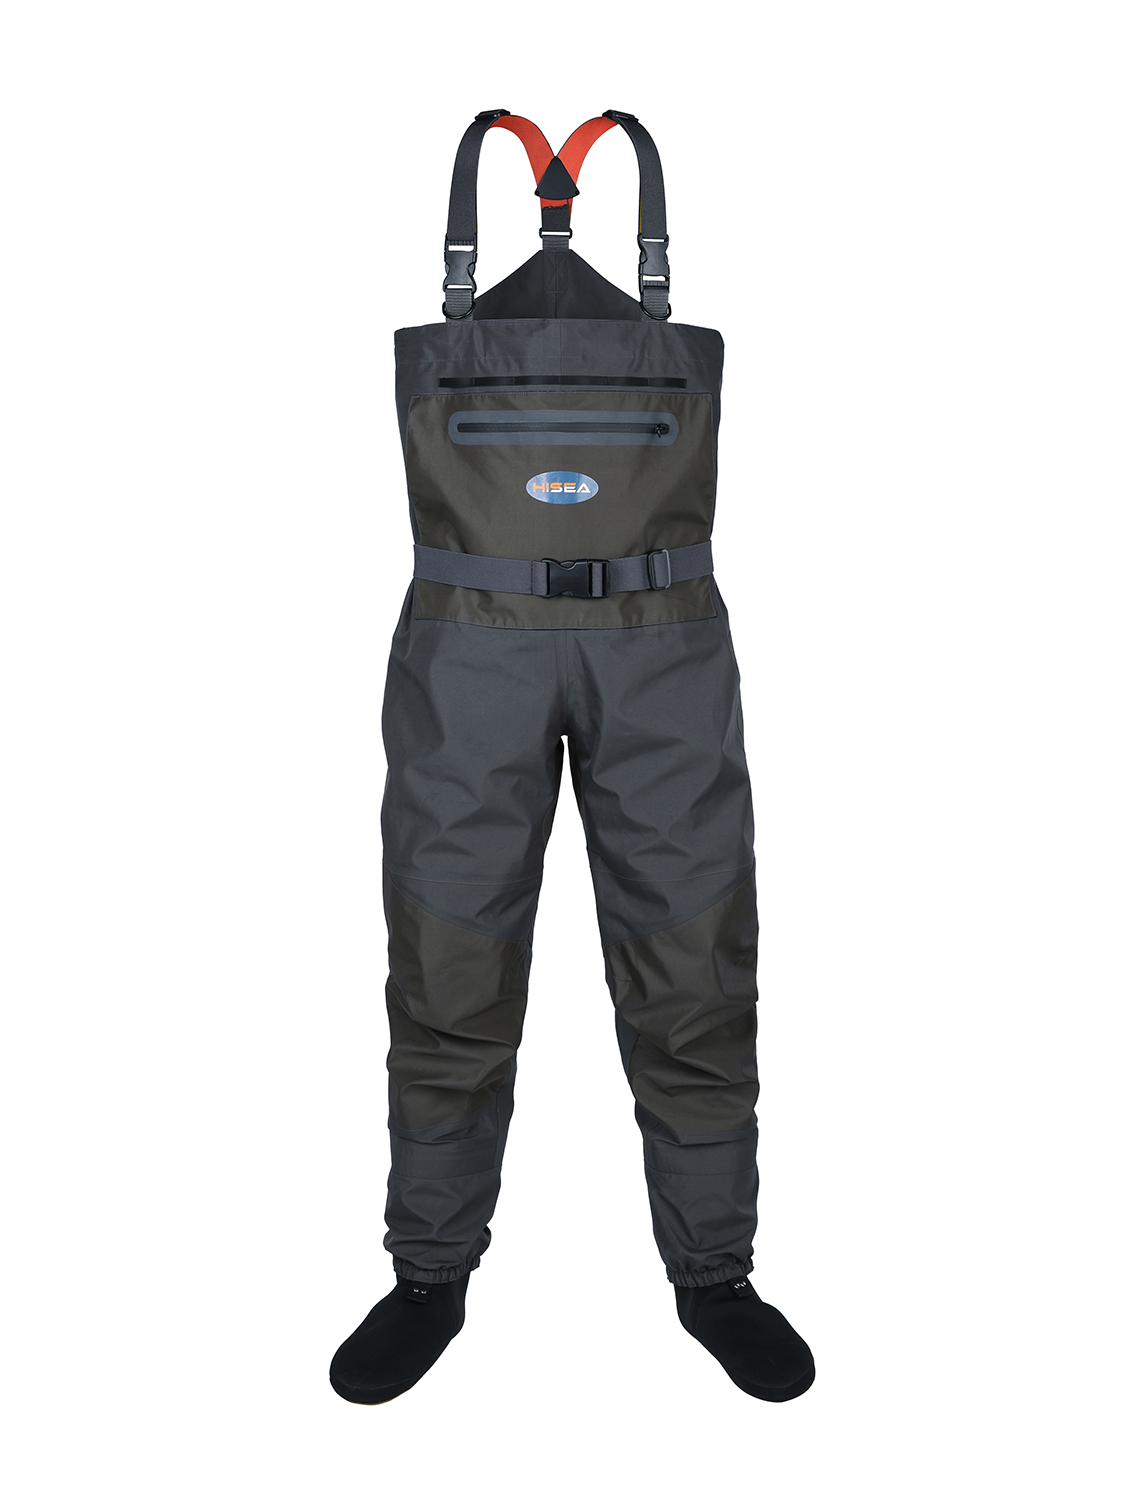 Hisea Fly Fishing Chest Waders Breathable Stocking Foot Wader with Boots for Men Women